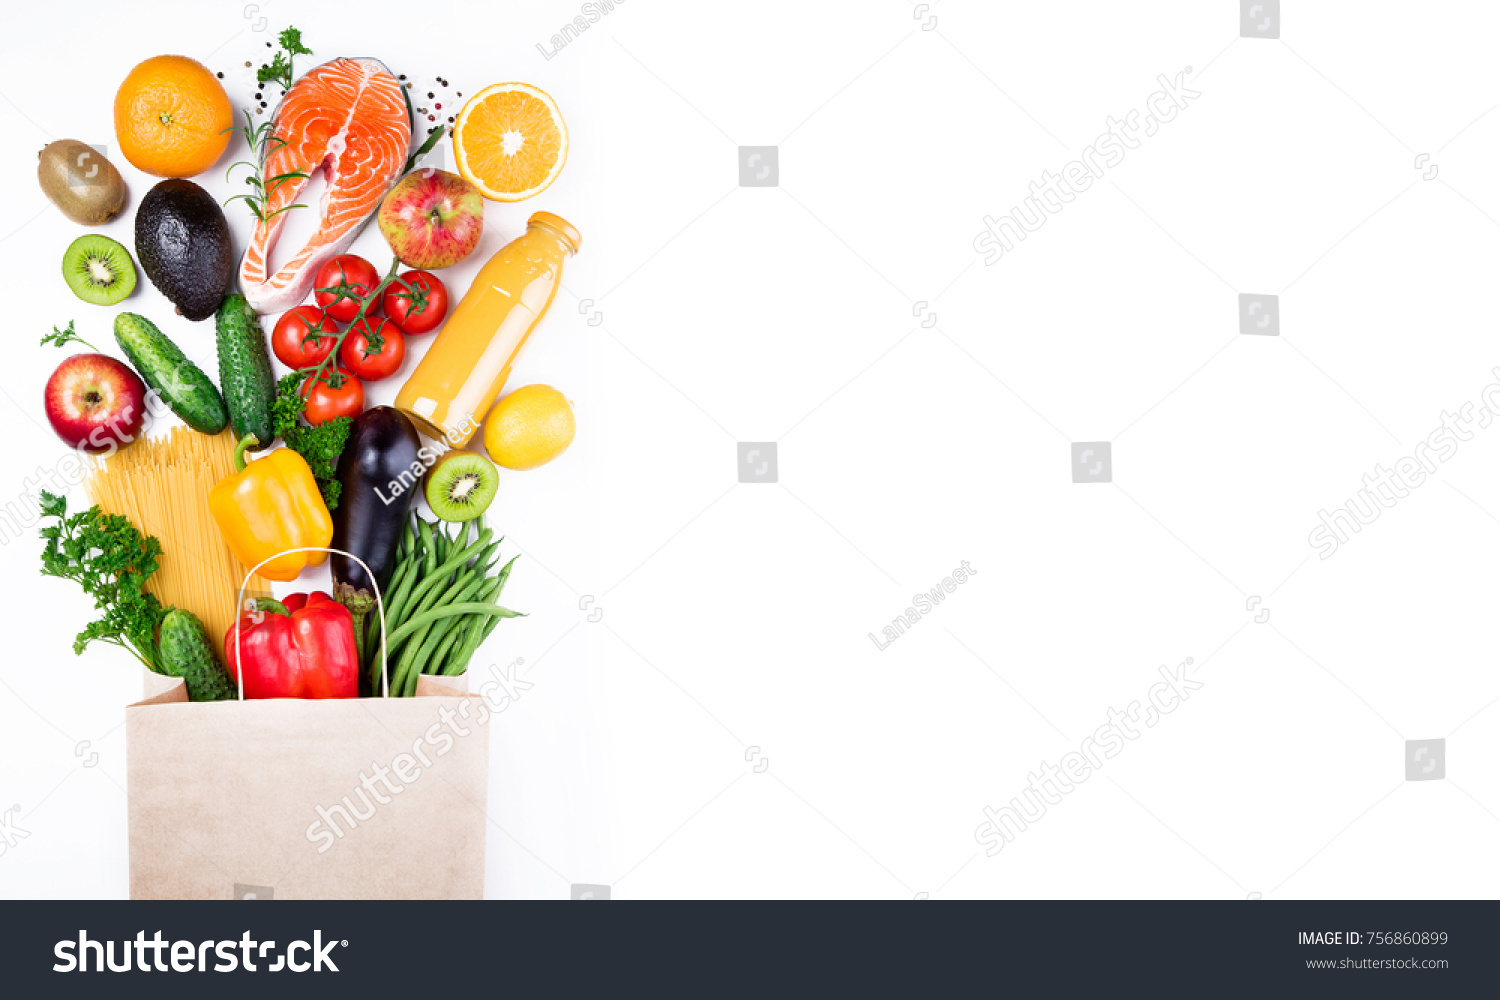 Healthy food background. Healthy food in paper bag fish, vegetables and fruits on white. Shopping food supermarket concept. Long format with copy space #756860899